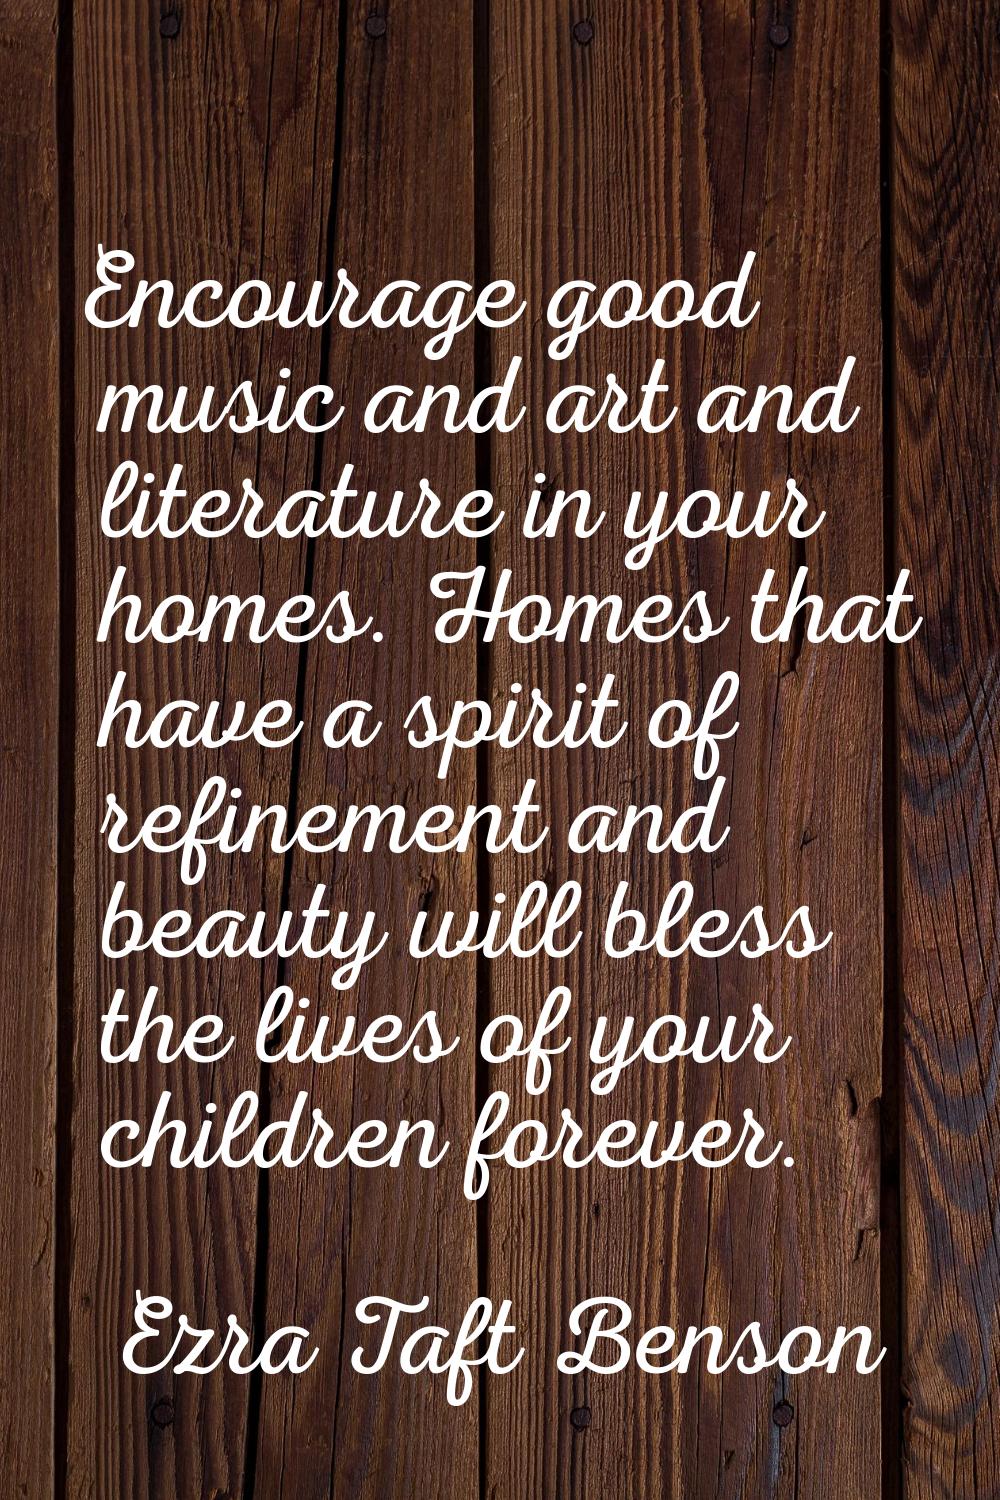 Encourage good music and art and literature in your homes. Homes that have a spirit of refinement a